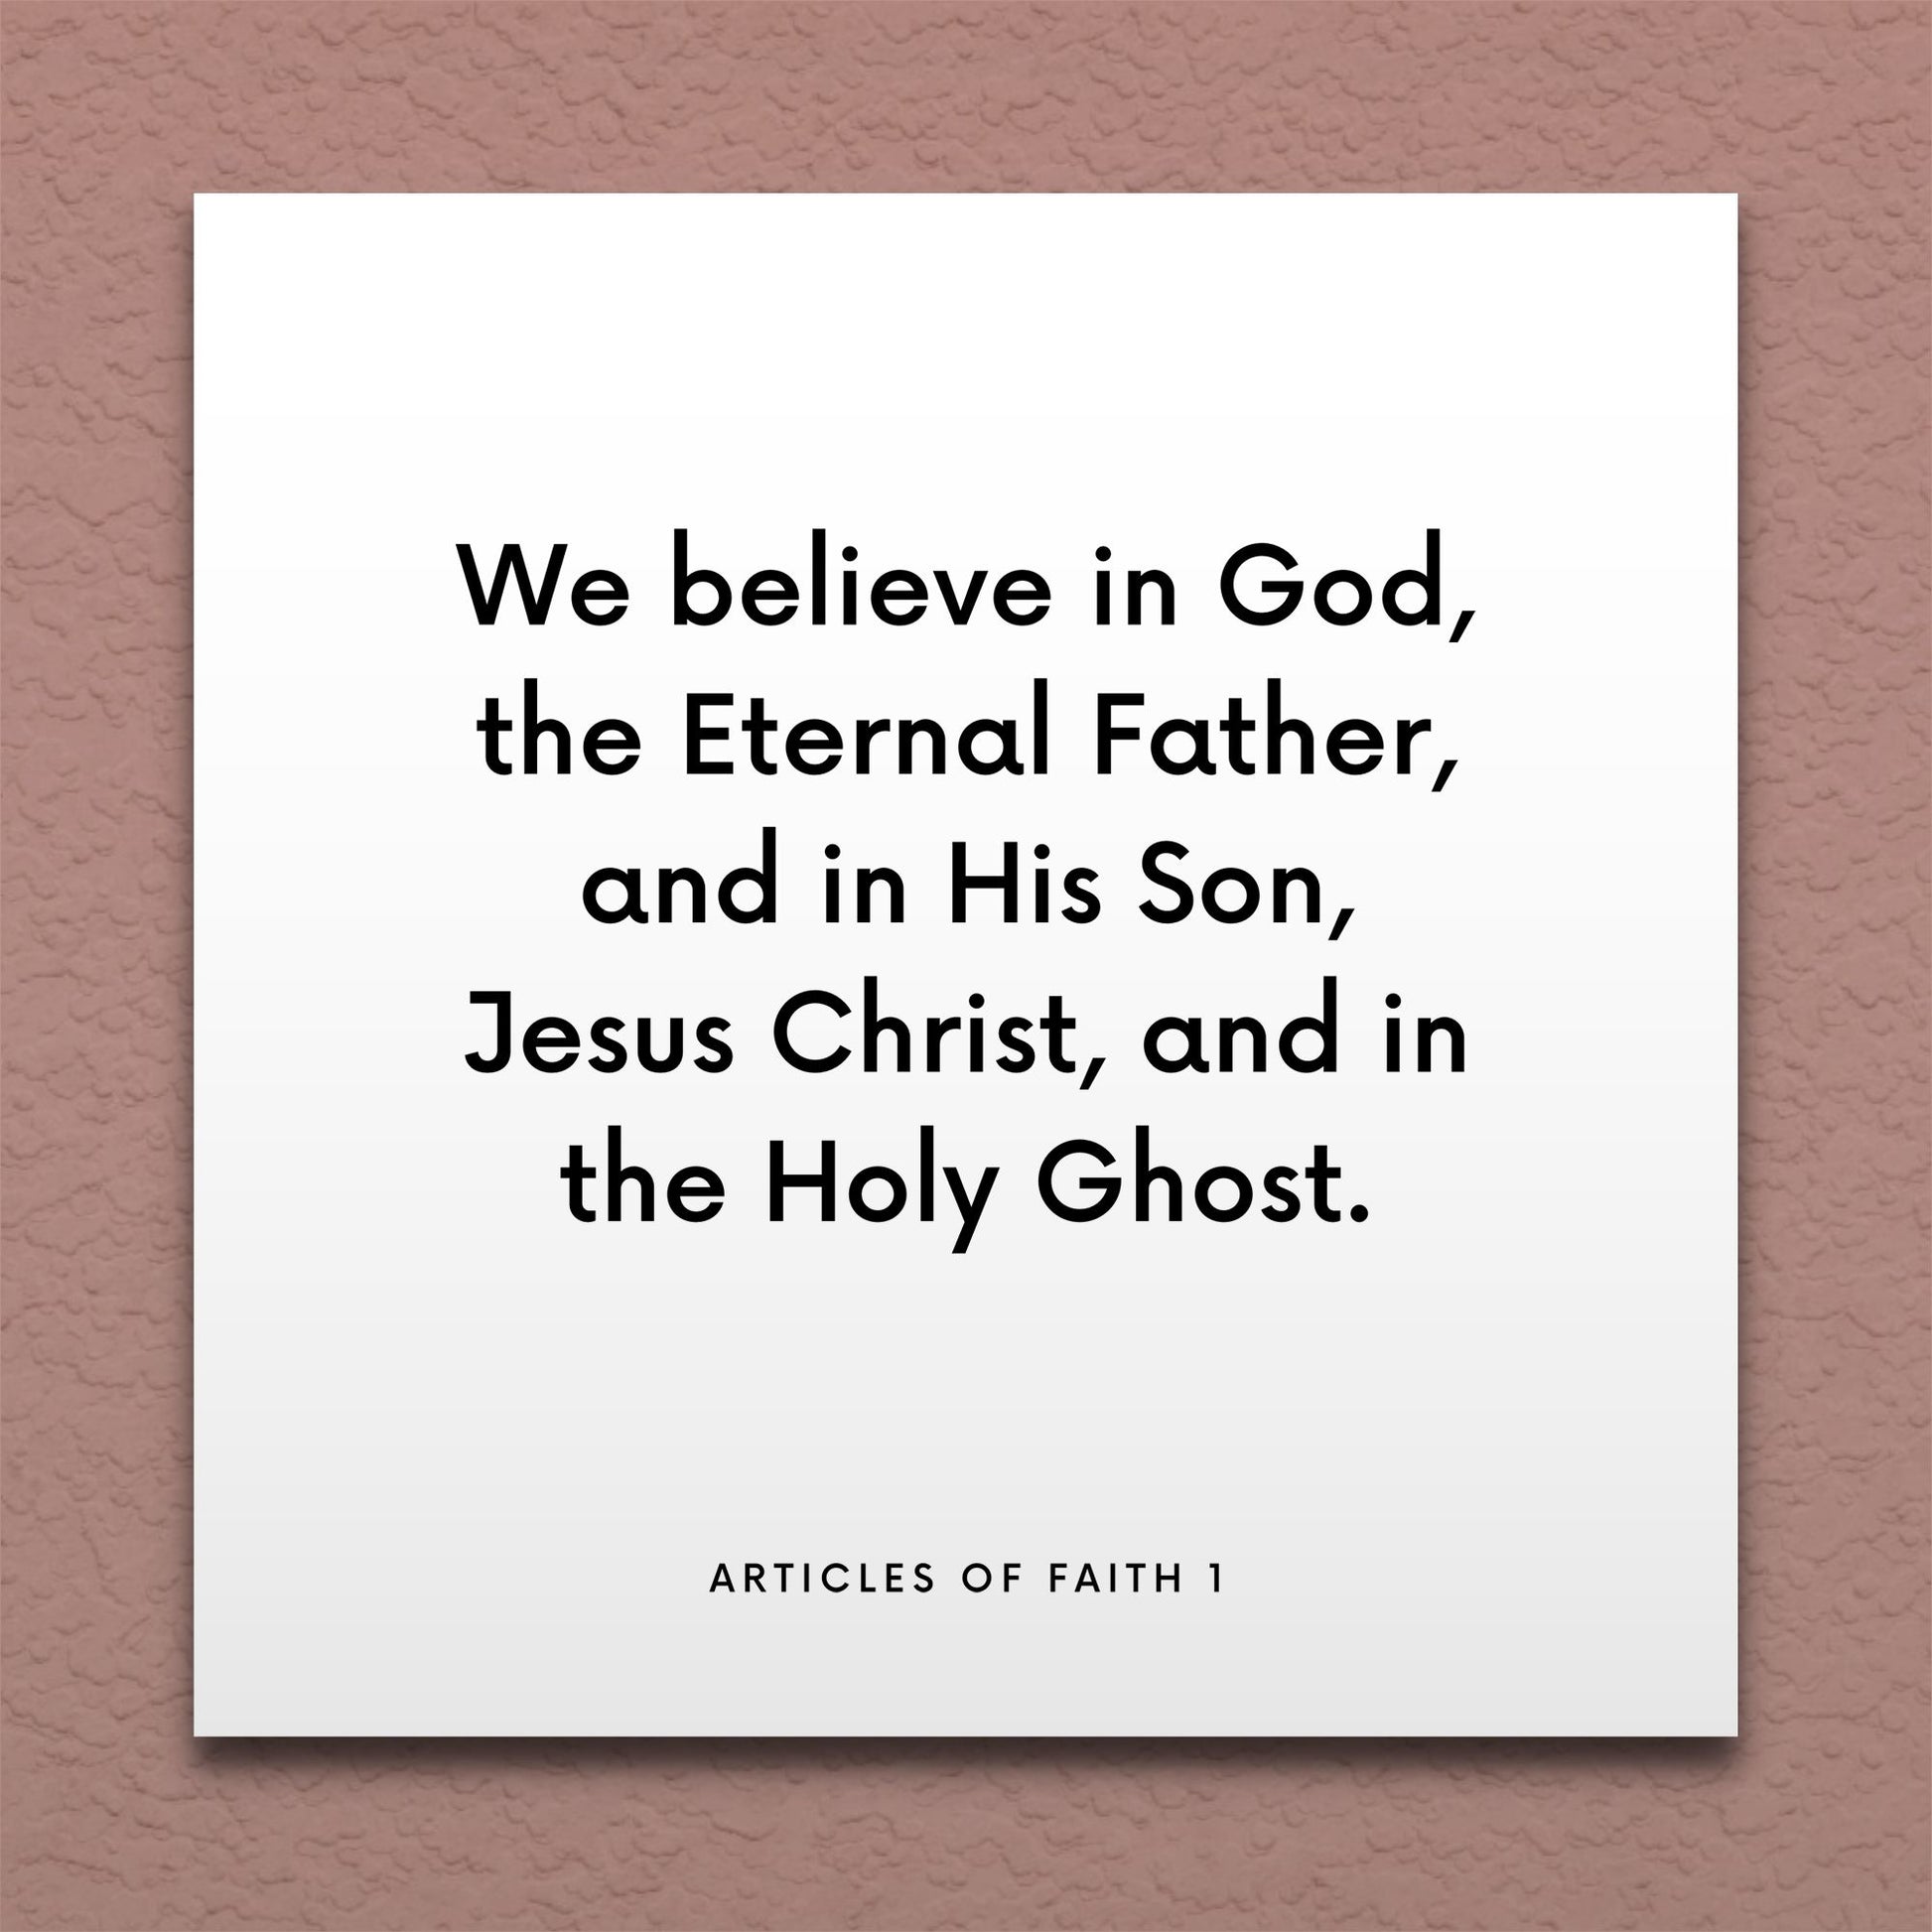 Wall-mounted scripture tile for Articles of Faith 1 - "We believe in God, the Eternal Father"